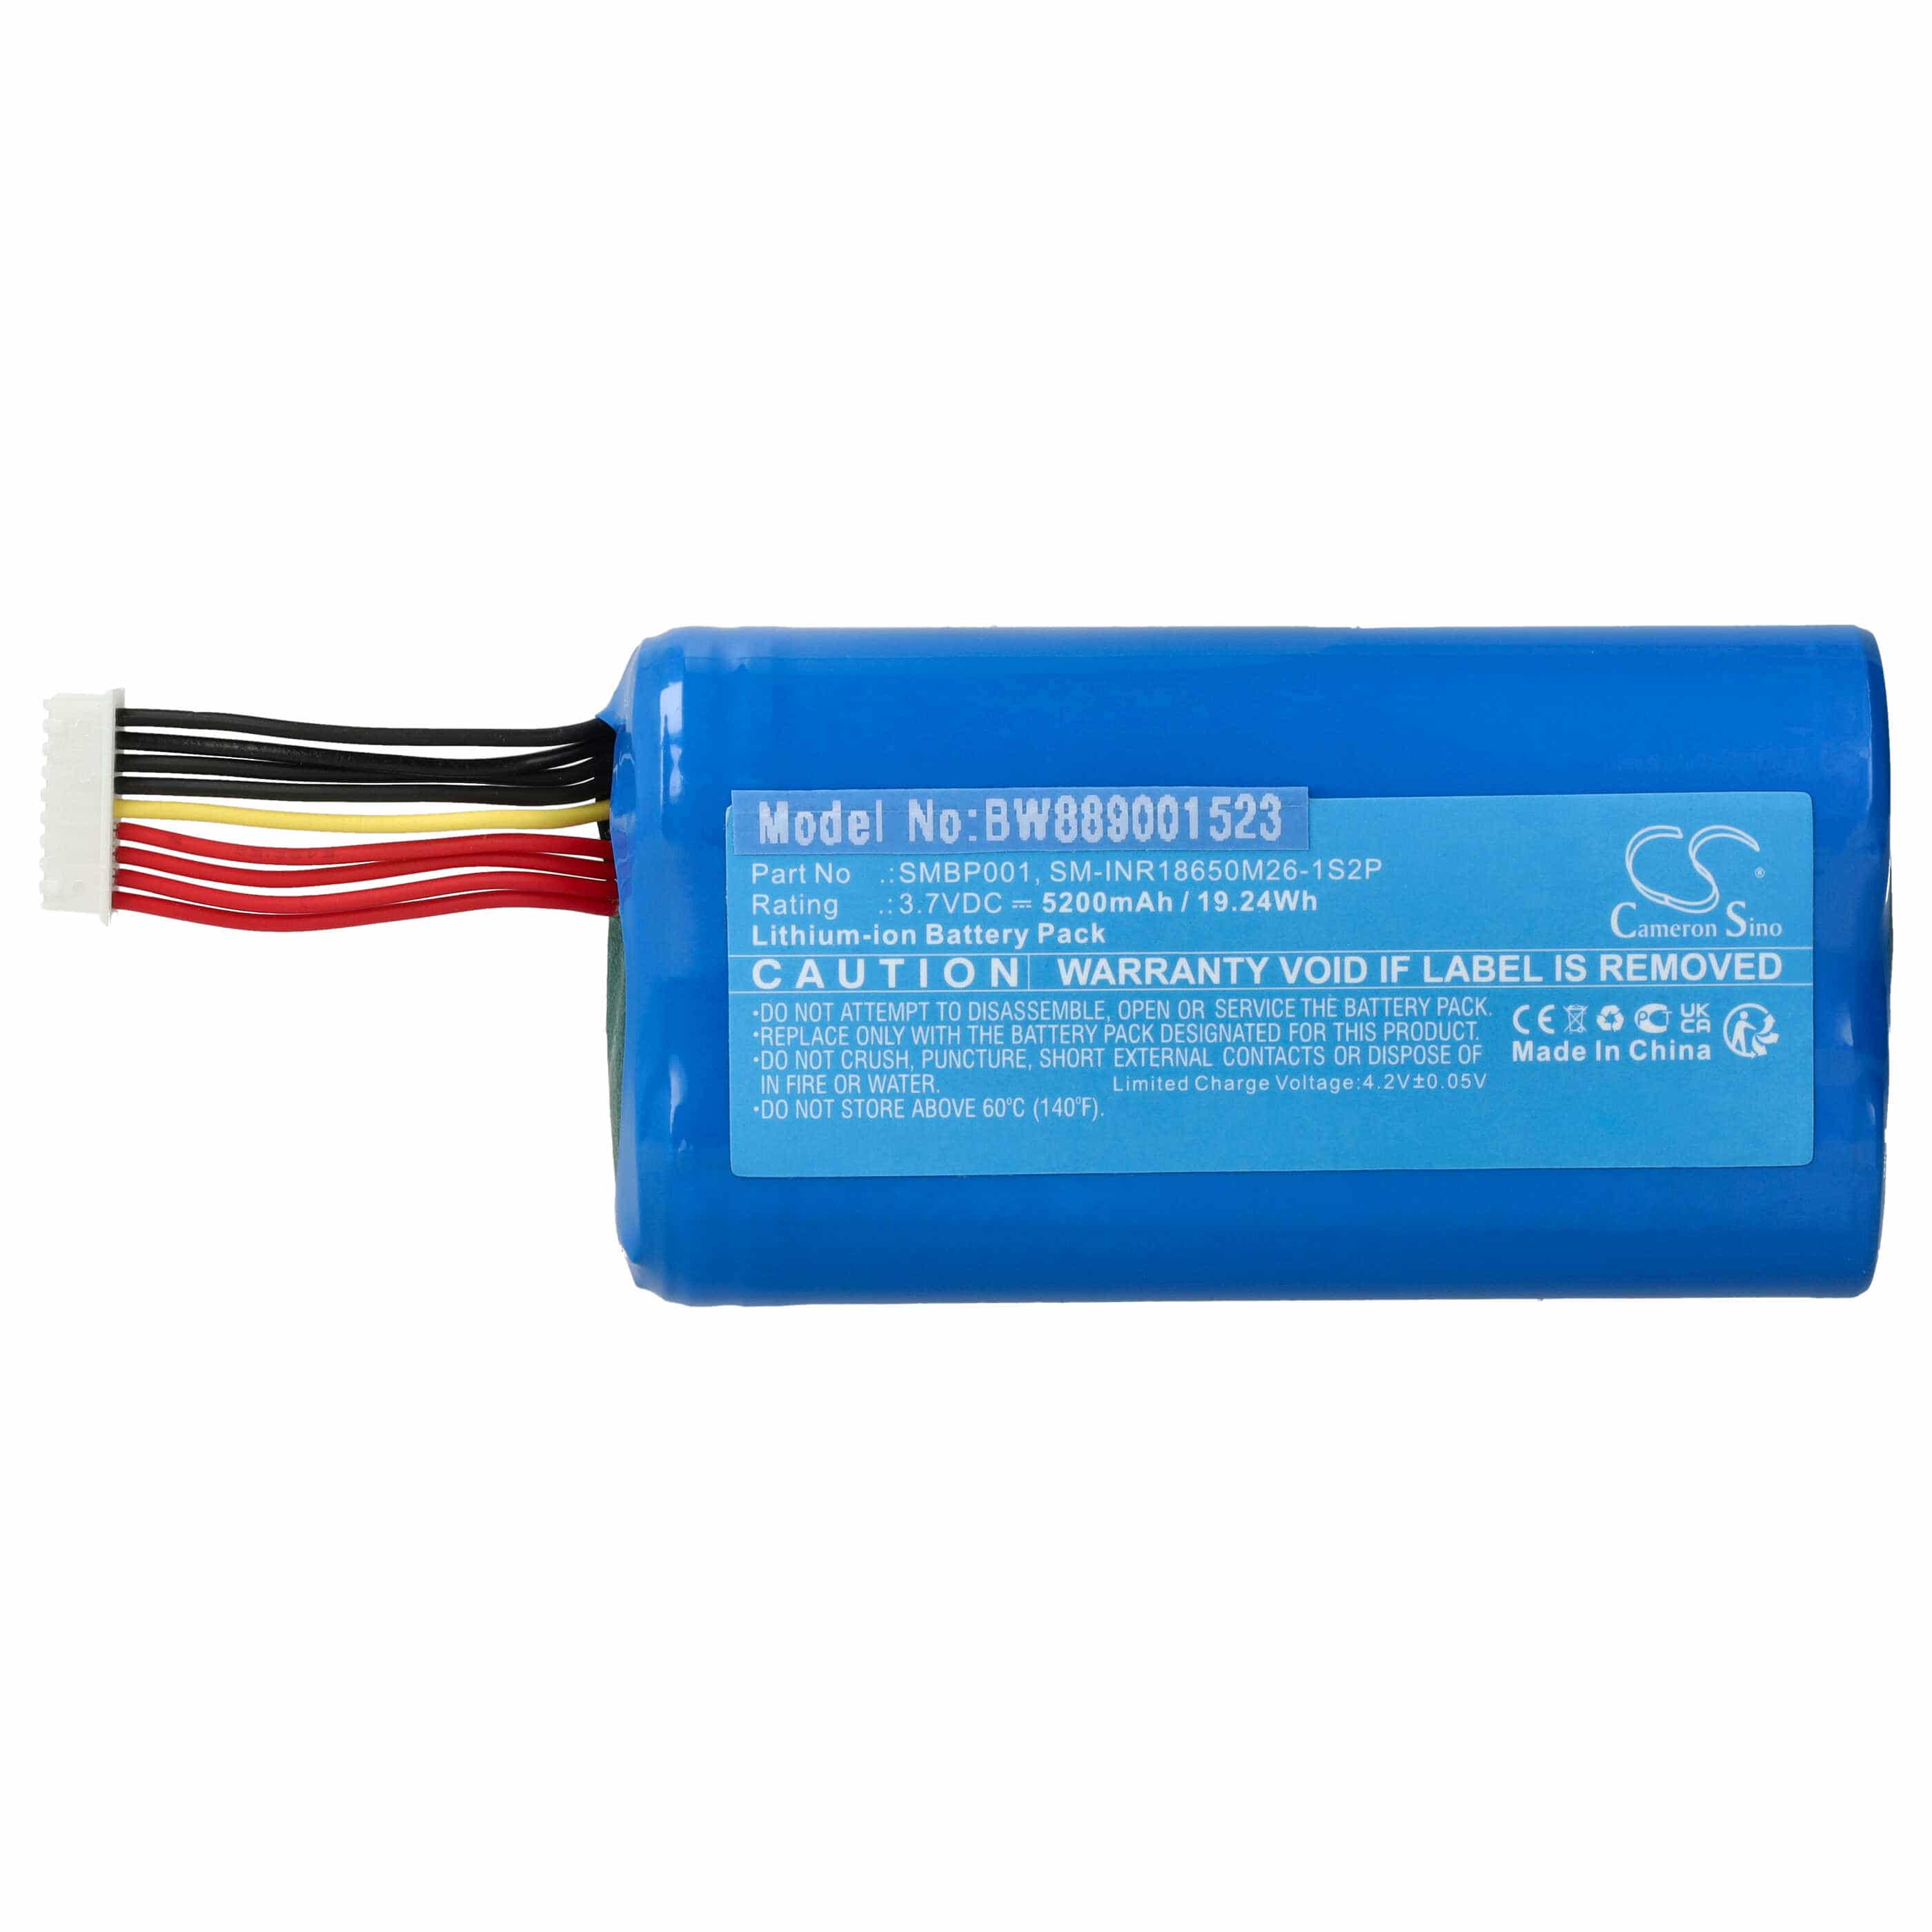 Barcode Scanner POS Battery Replacement for Sunmi SM-INR18650M26-1S2P, SMBP001 - 5200 mAh 3.7 V Li-Ion